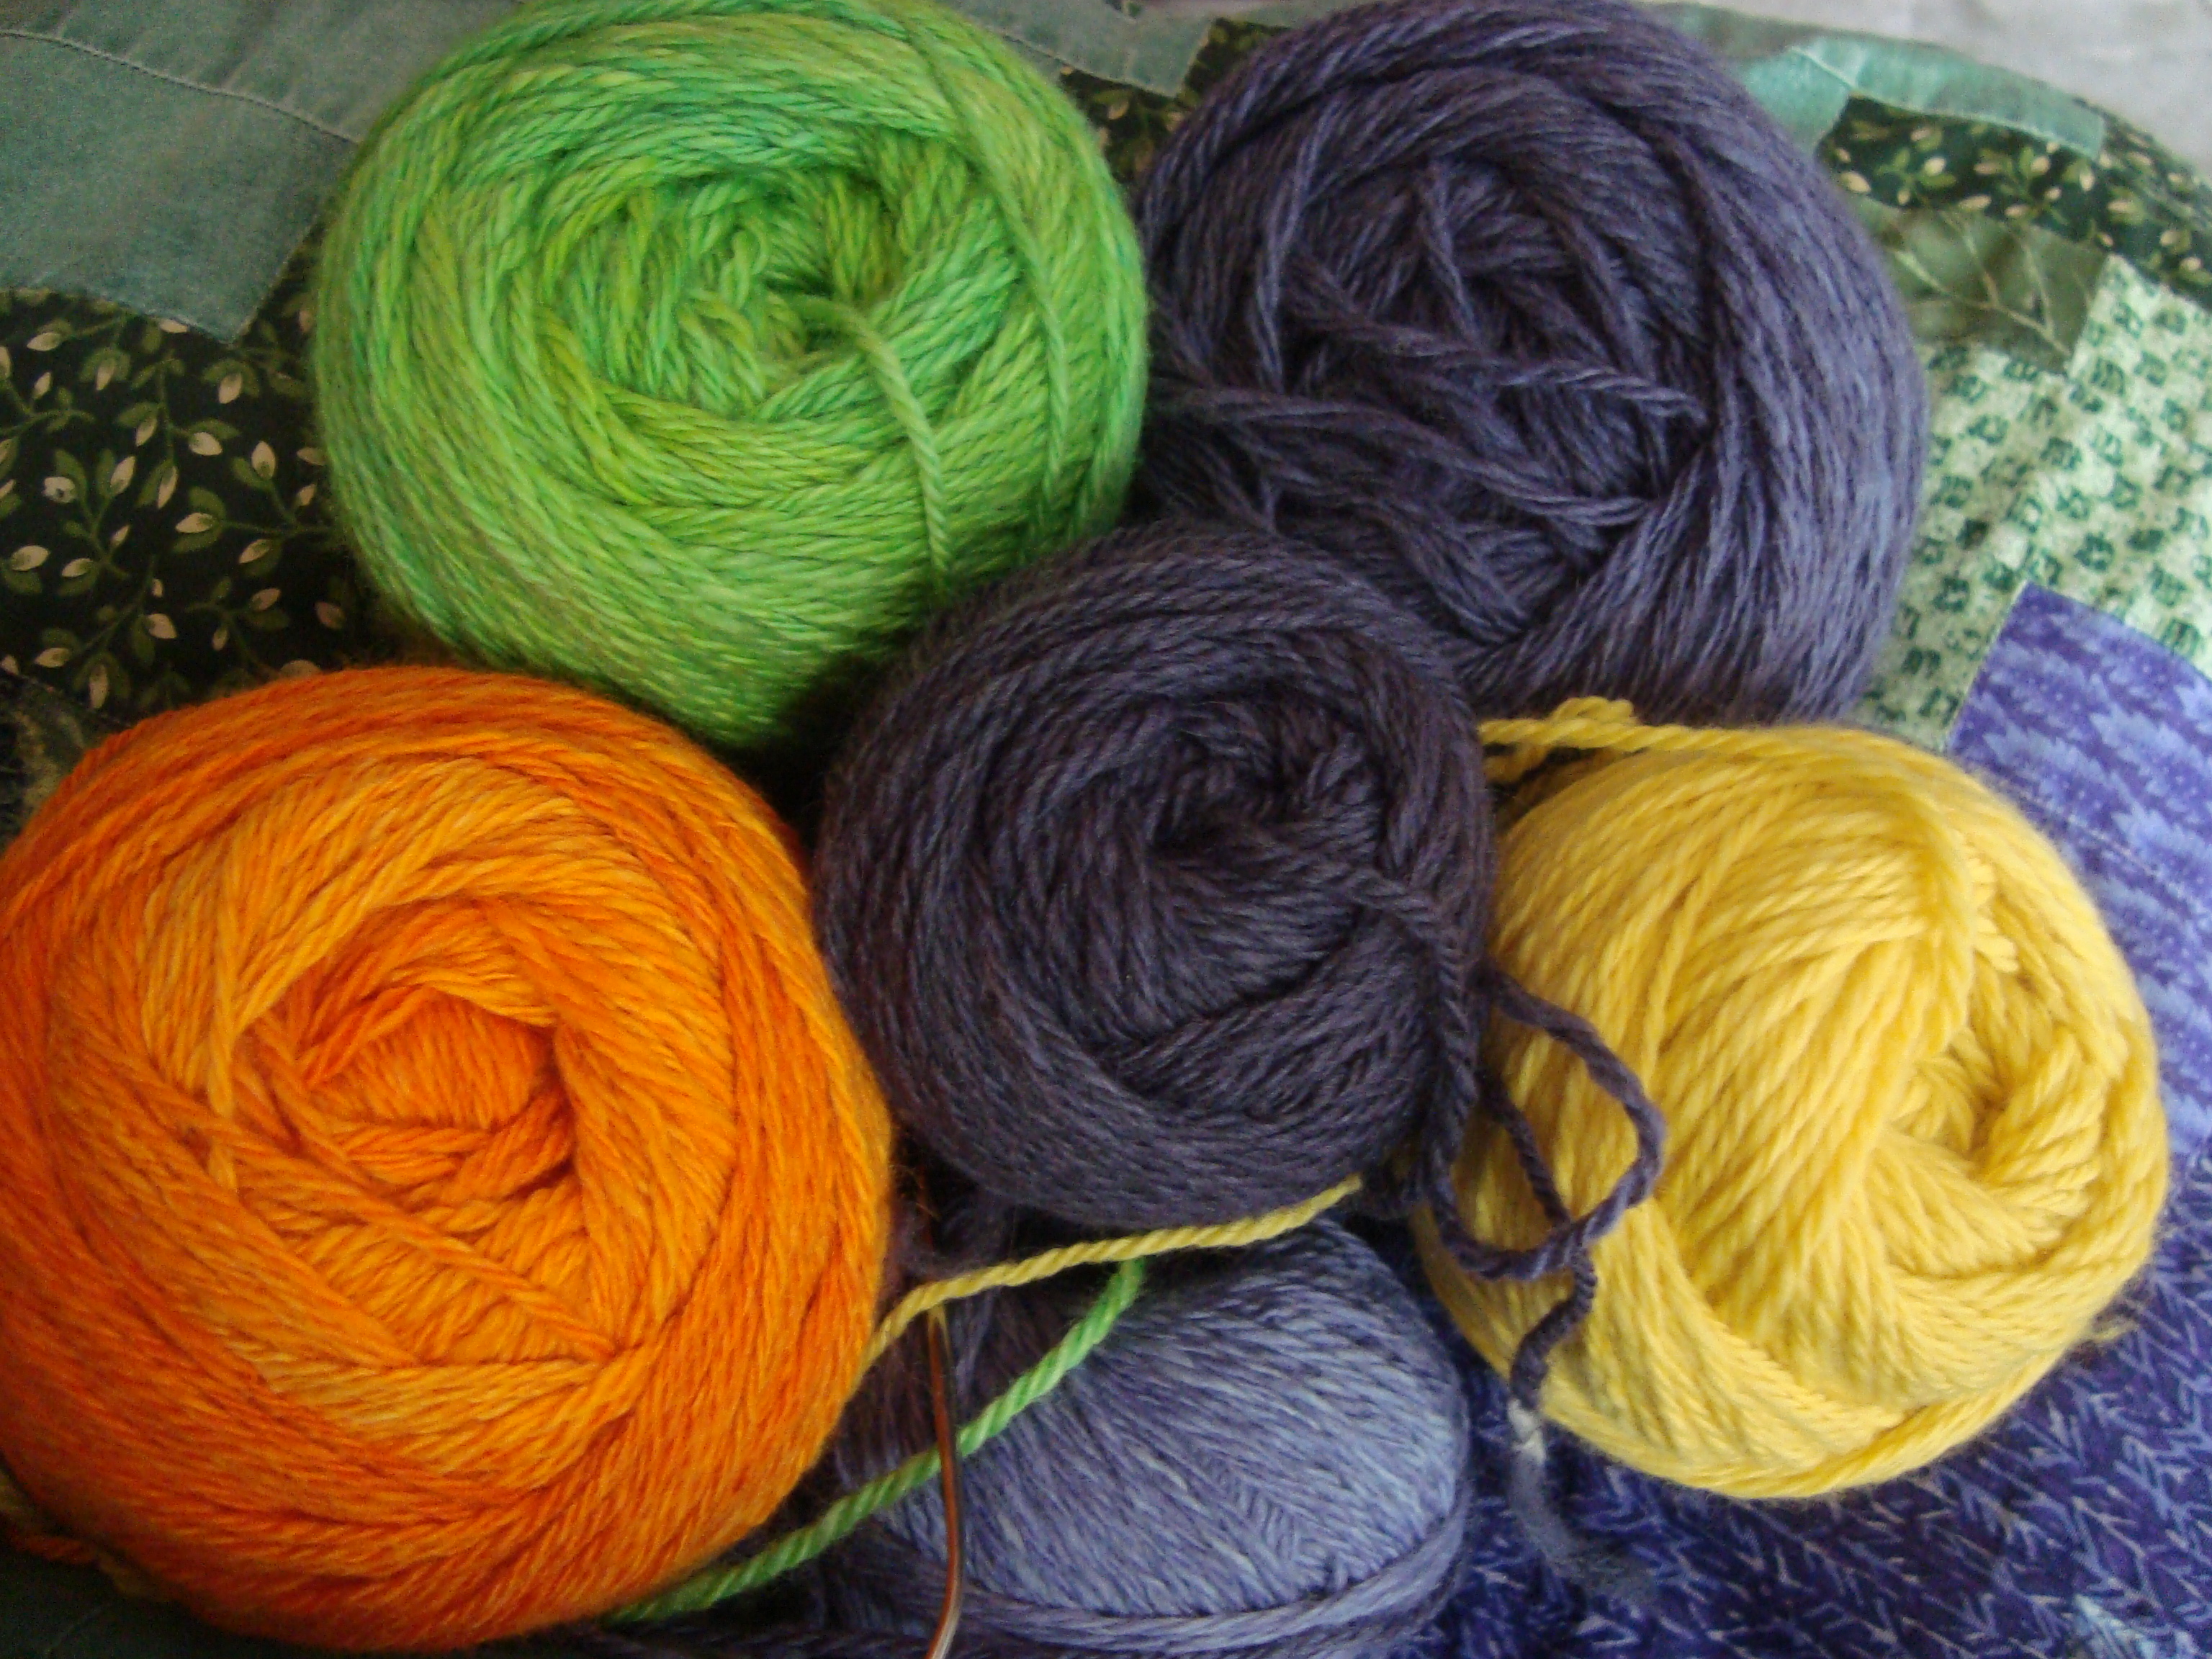 Spun up some multicolored yarn with plans to knit a sweater for my